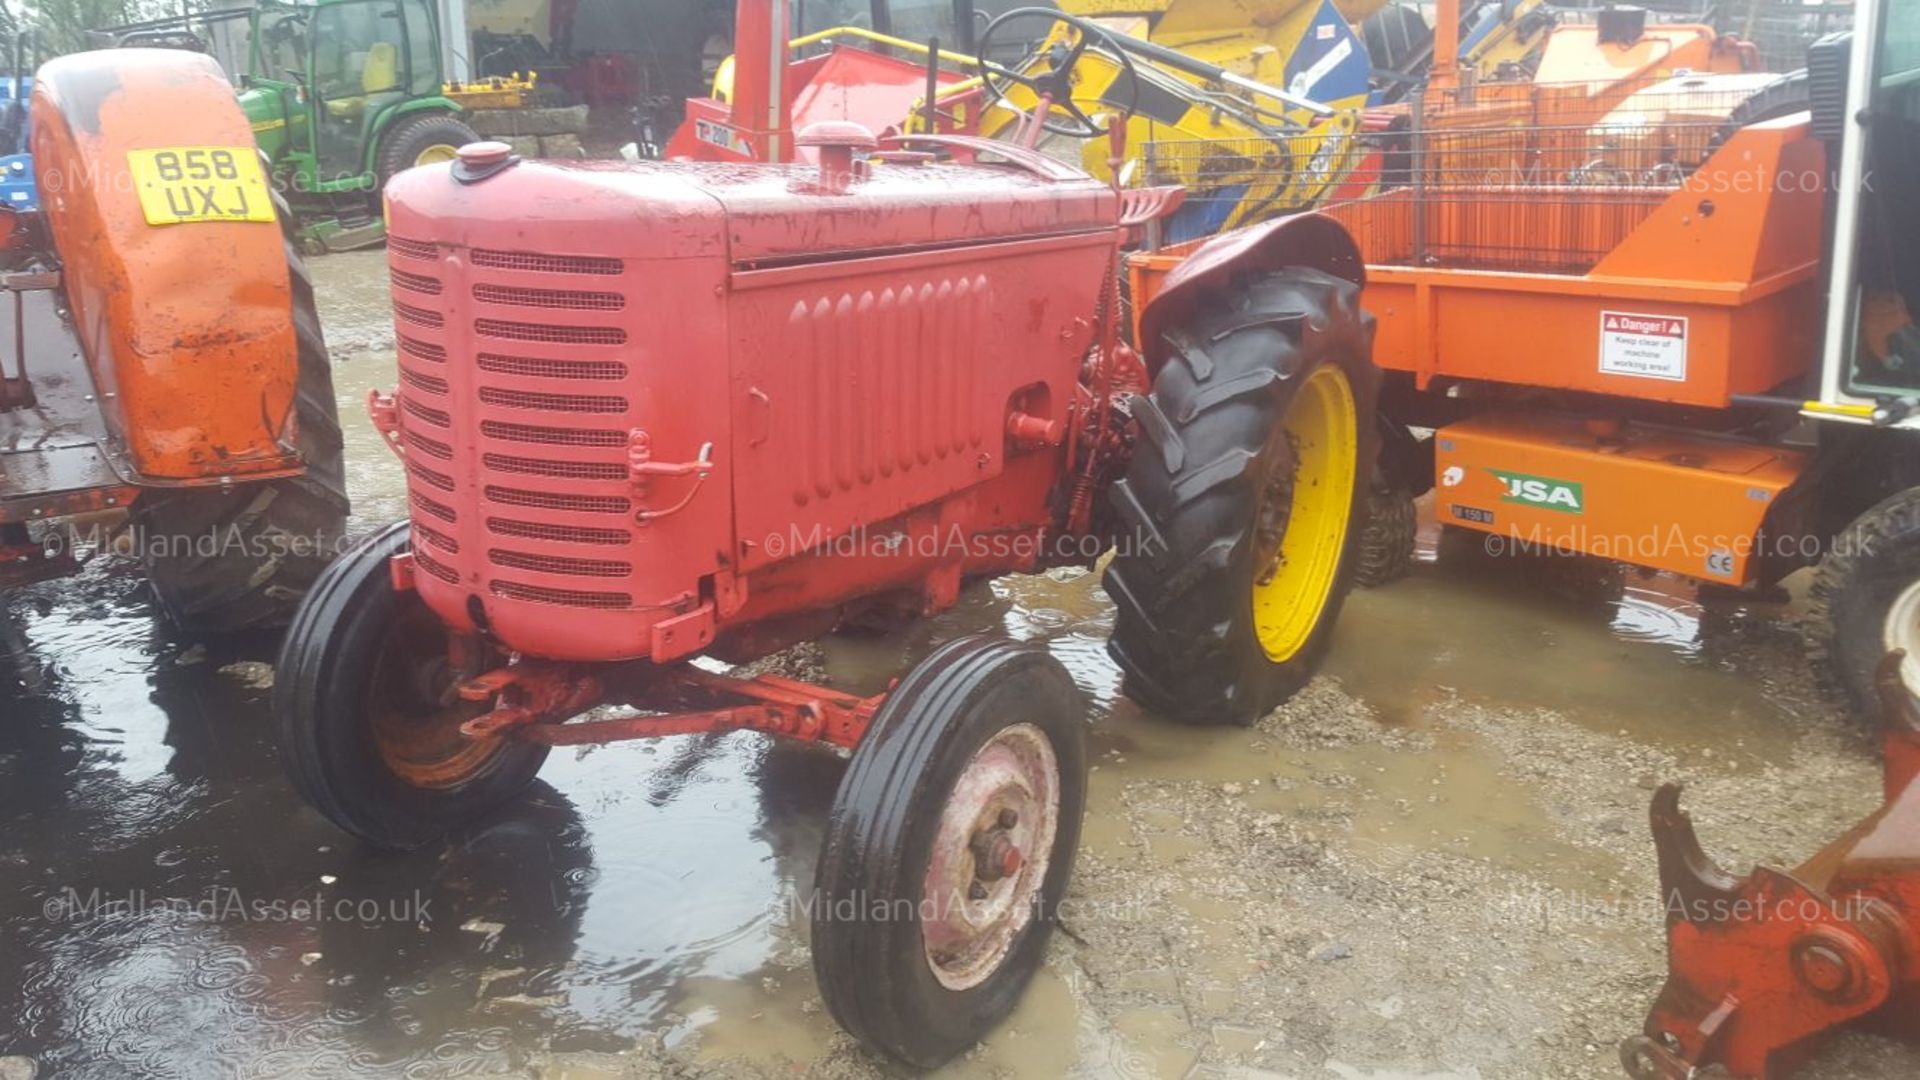 RENAULT R3043 TRACTOR, 4 CYLINDER PETROL ENGINE, YEAR UNKNOWN *PLUS VAT* - Image 2 of 6